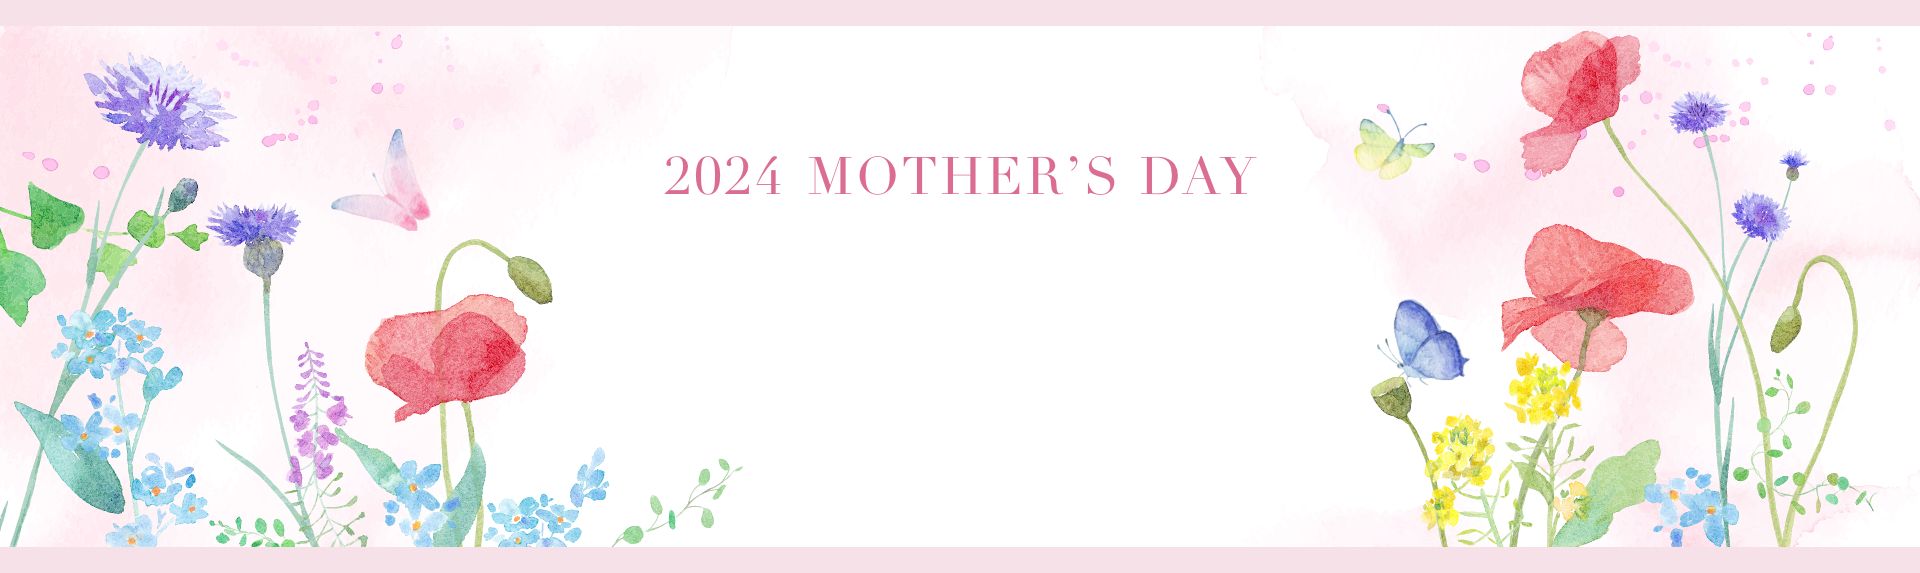 2024 MOTHER’S DAY